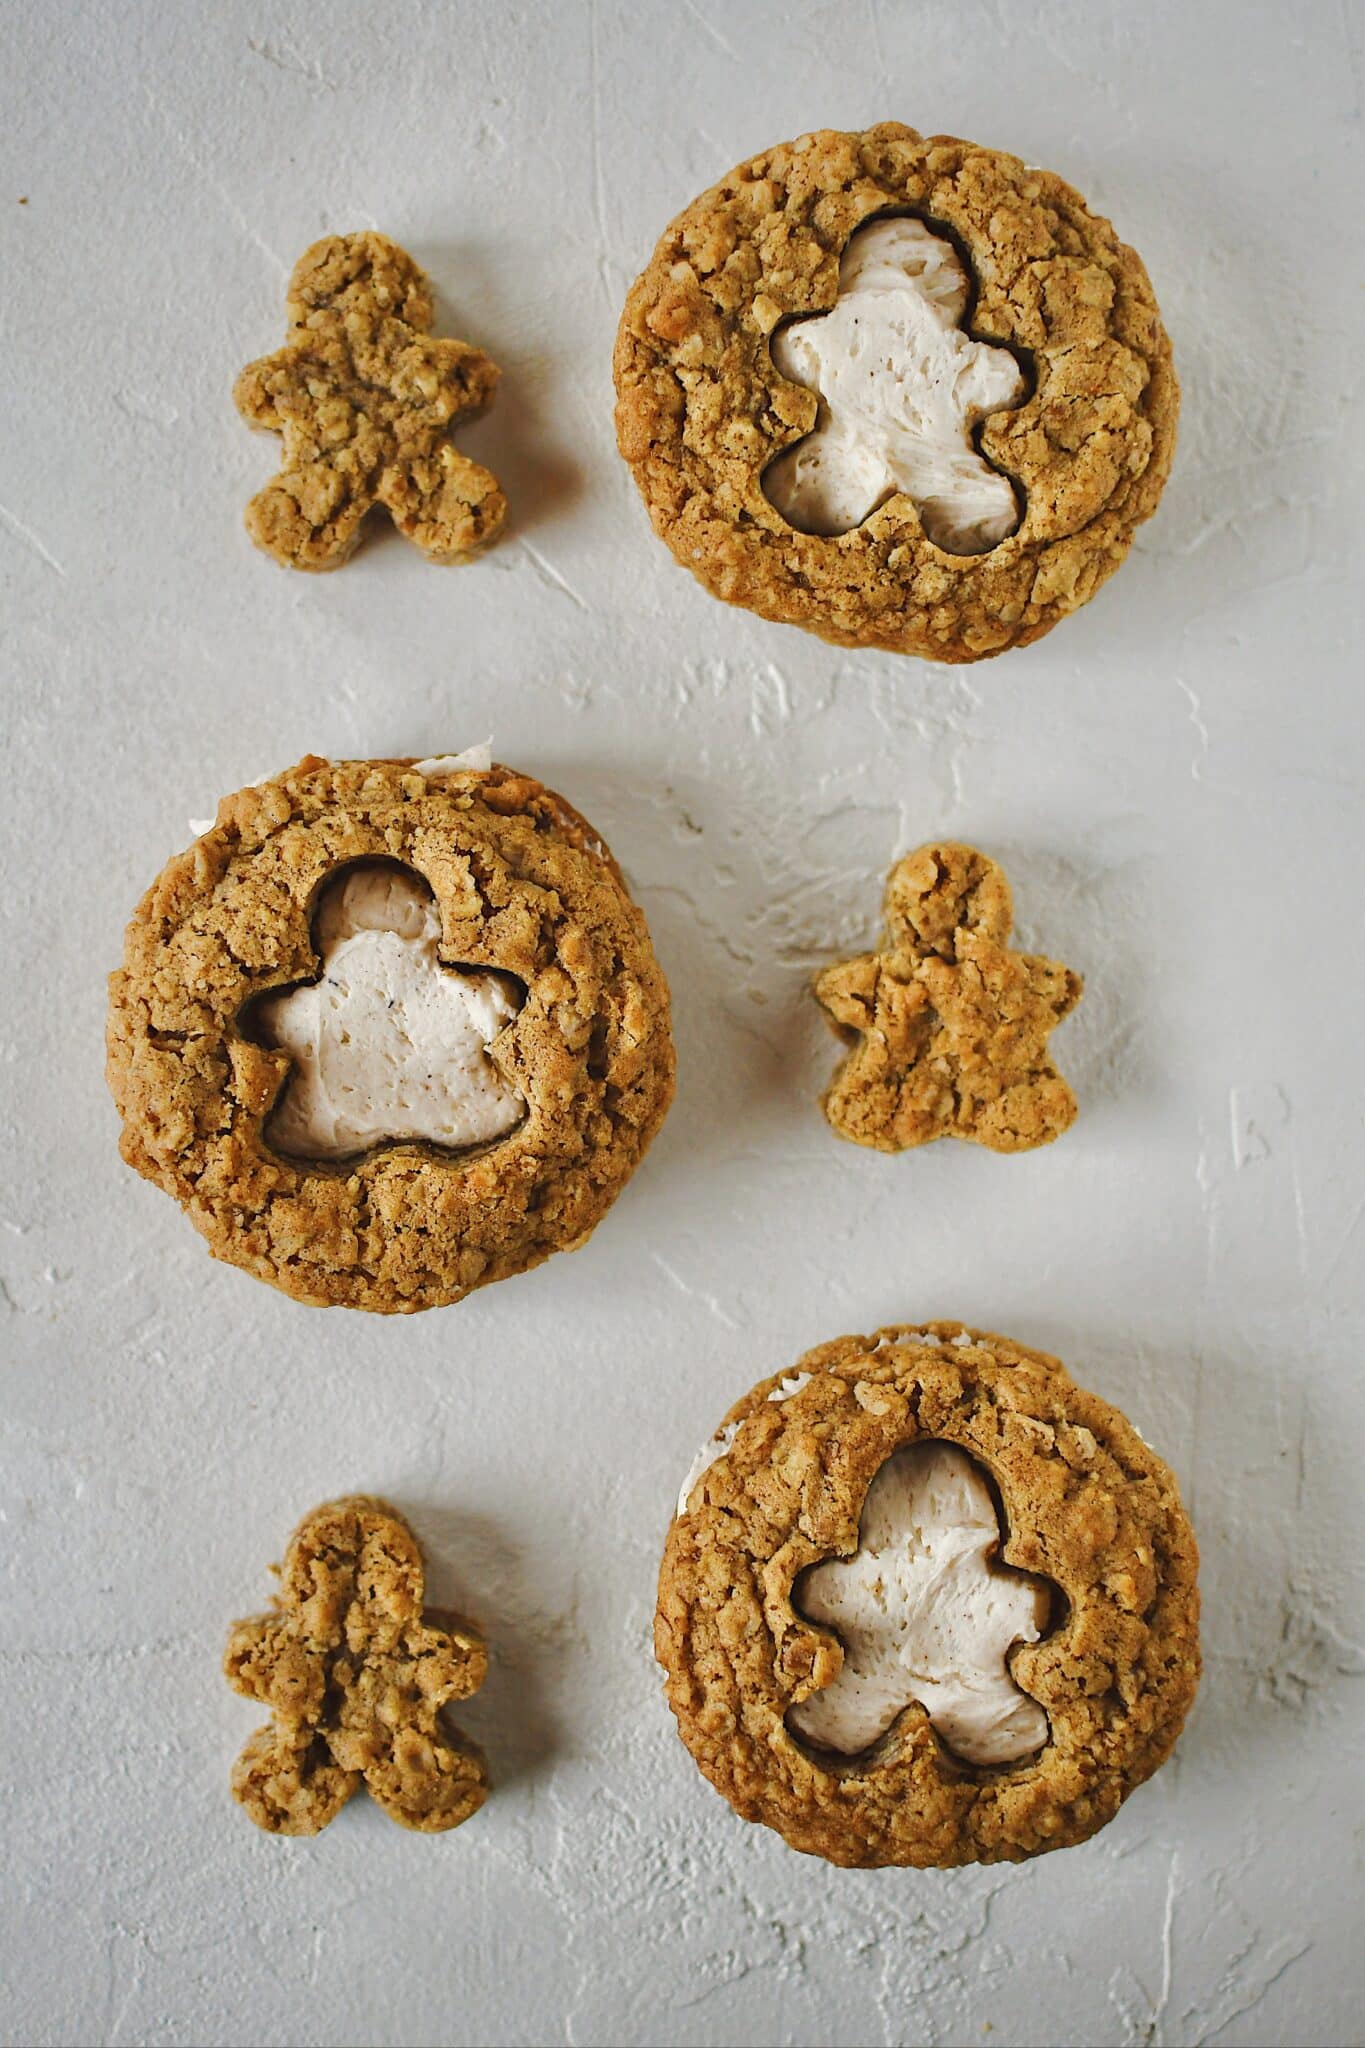 Gingerbread Oatmeal Cream Pie with the shape of gingerbread man cut out of one side and sandwiched together.